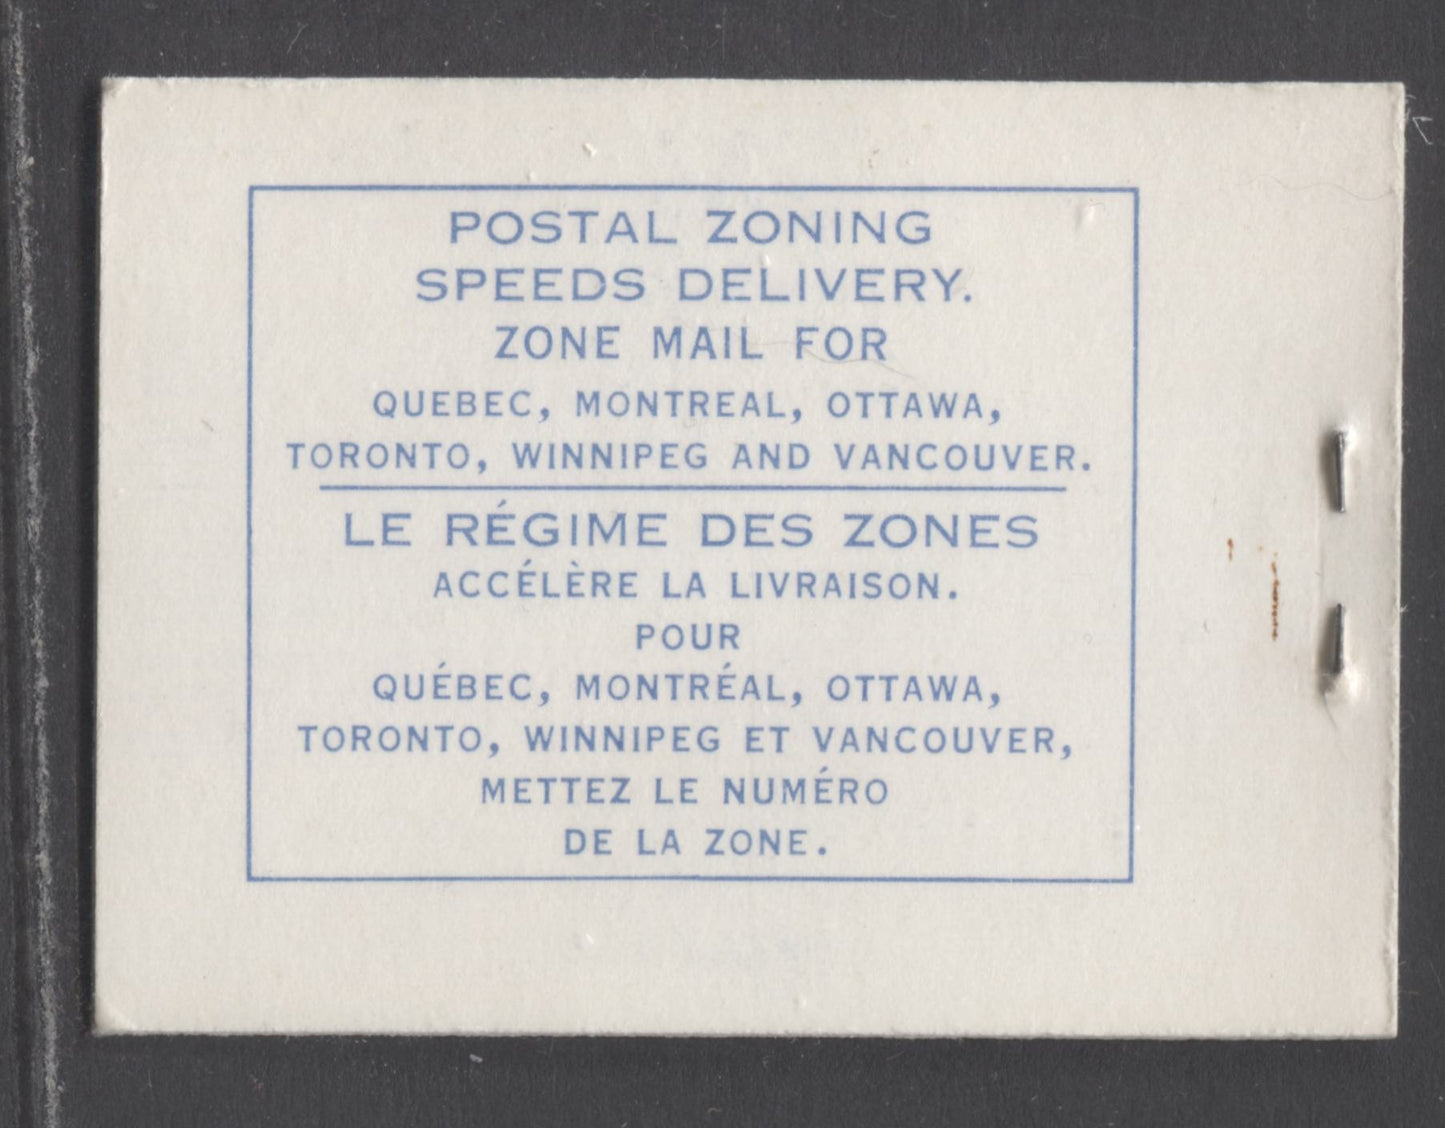 Lot 221 Canada #BK52b 1962-1967 Cameo Issue, a VFNH Booklet Containing A 5c Pane of 5 + Label, Type II Cover "Local 4c First Ounce", DF Pane, HB Interleaving, 12.5mm Staple